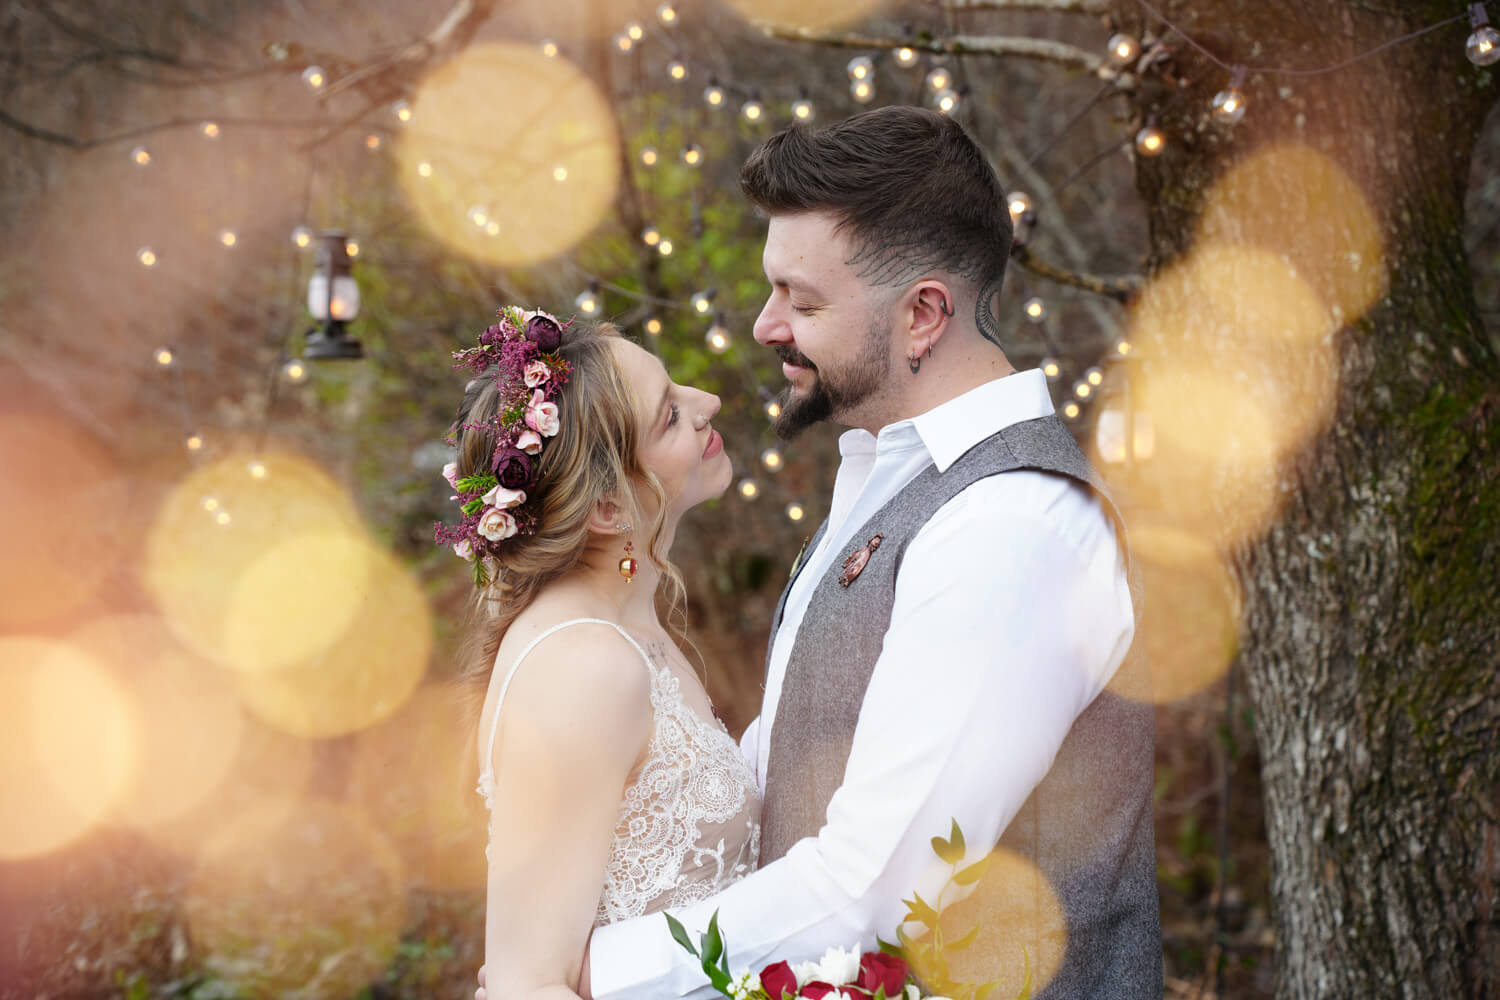 Boho style bride and groom under twinkling lights of a willow tree in the fall